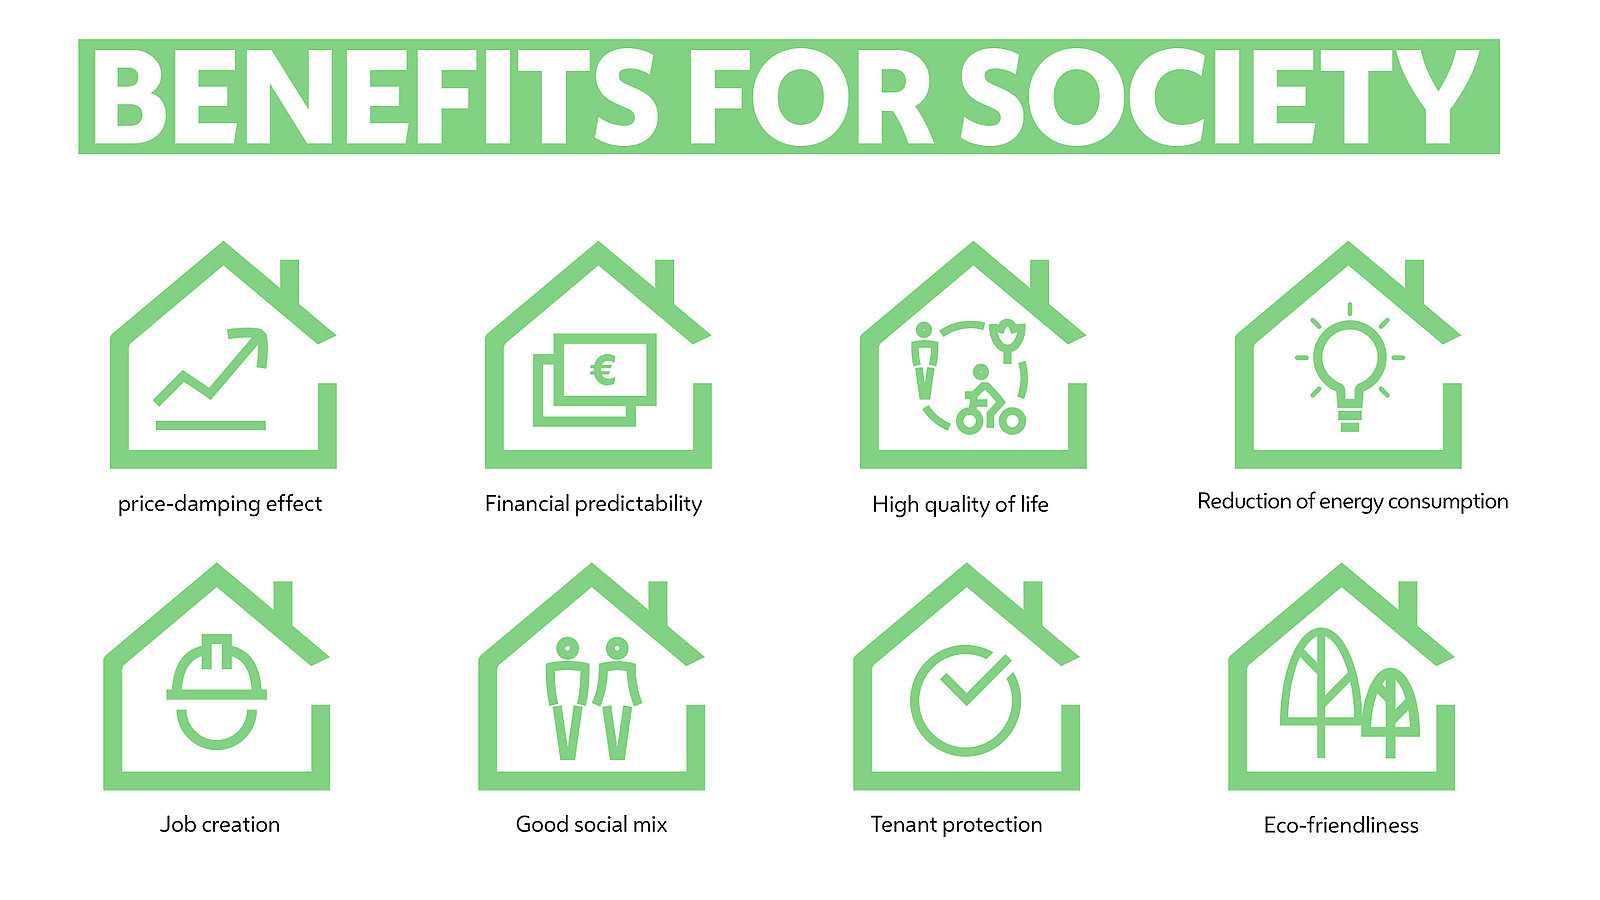 Benefits for society